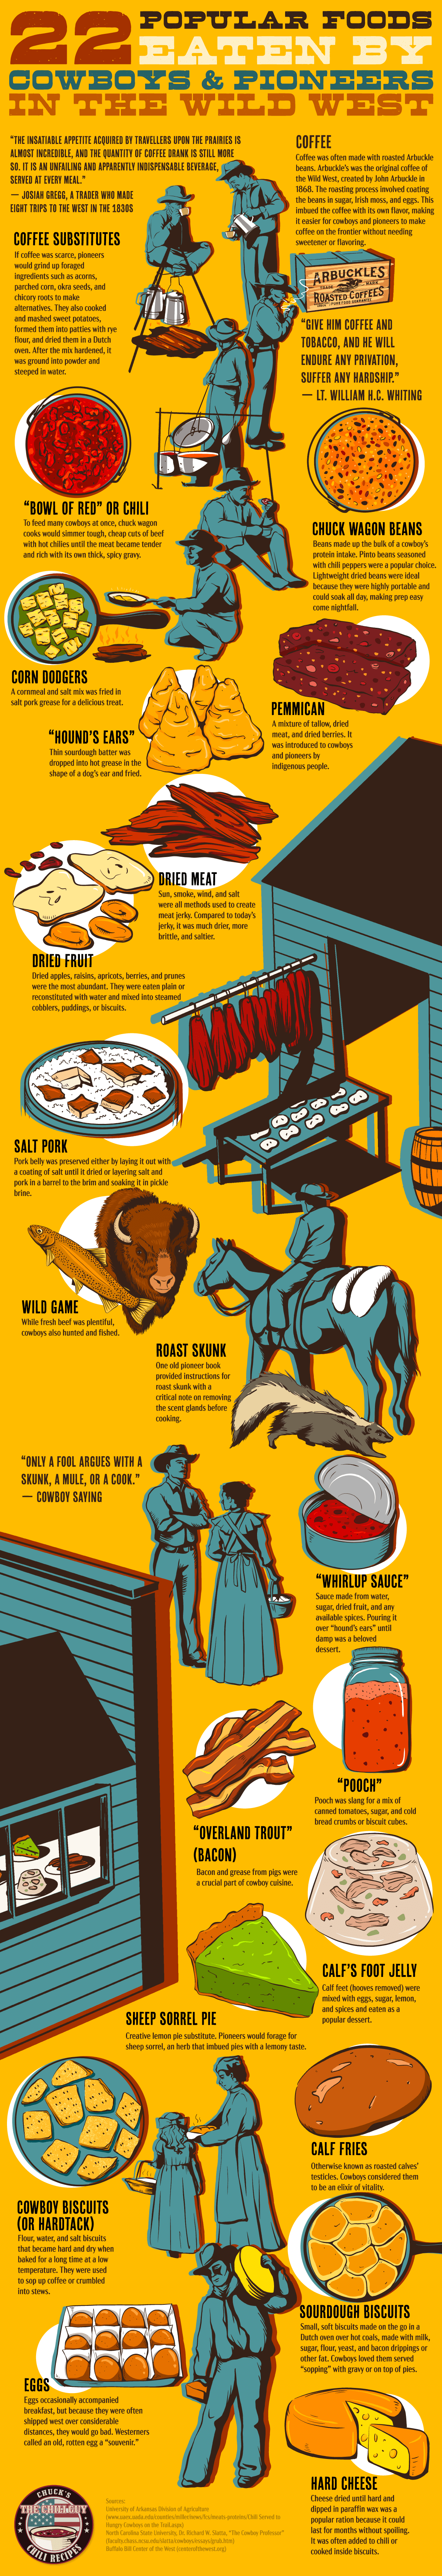 22 Popular Foods Eaten By Cowboys and Pioneers in the Wild West